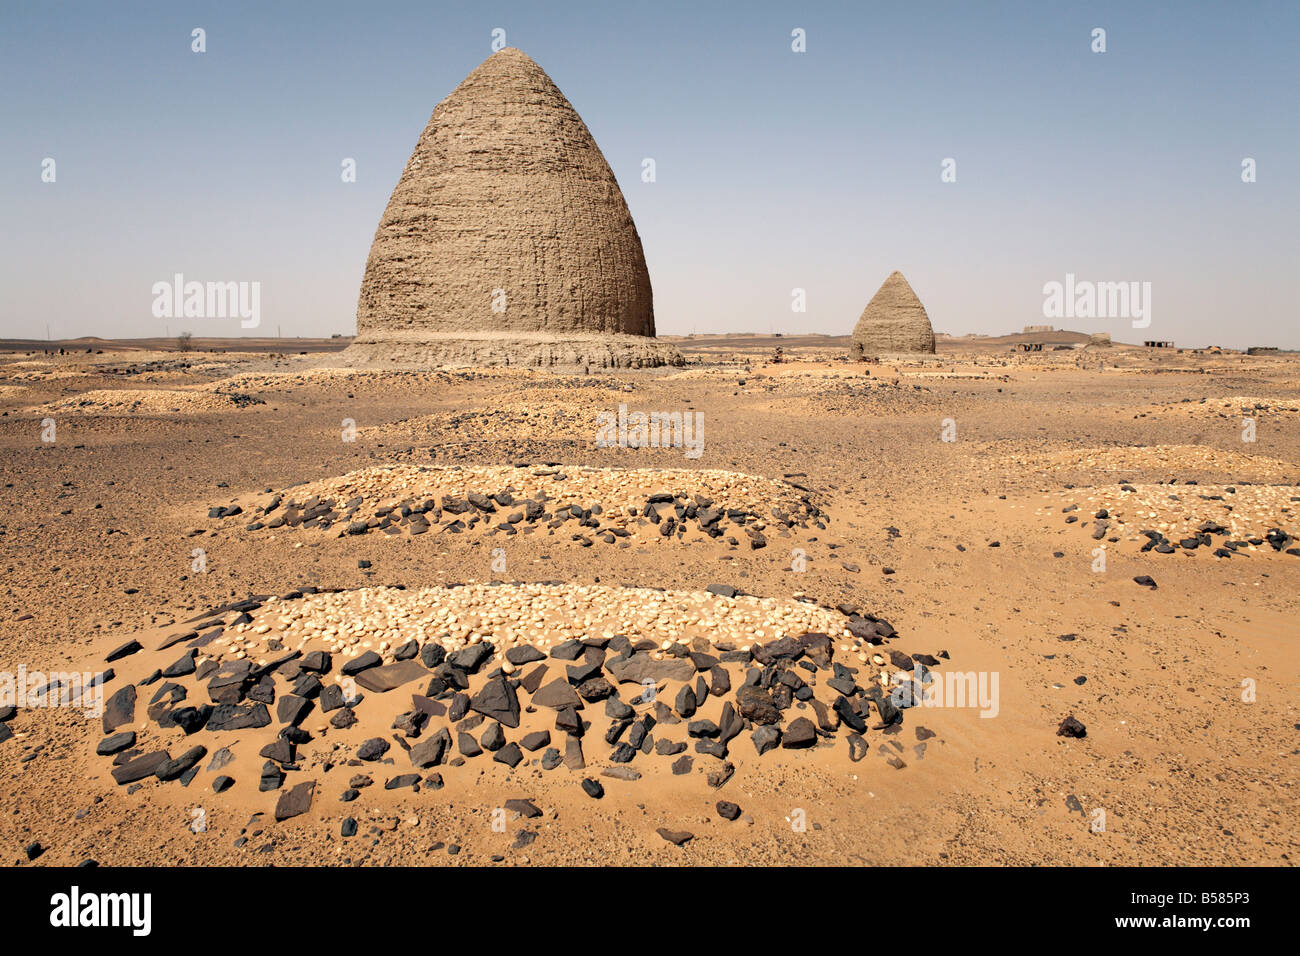 Graves, including beehive graves (Tholos tombs), in the desert near the ruins of the medieval city of Old Dongola, Sudan, Africa Stock Photo